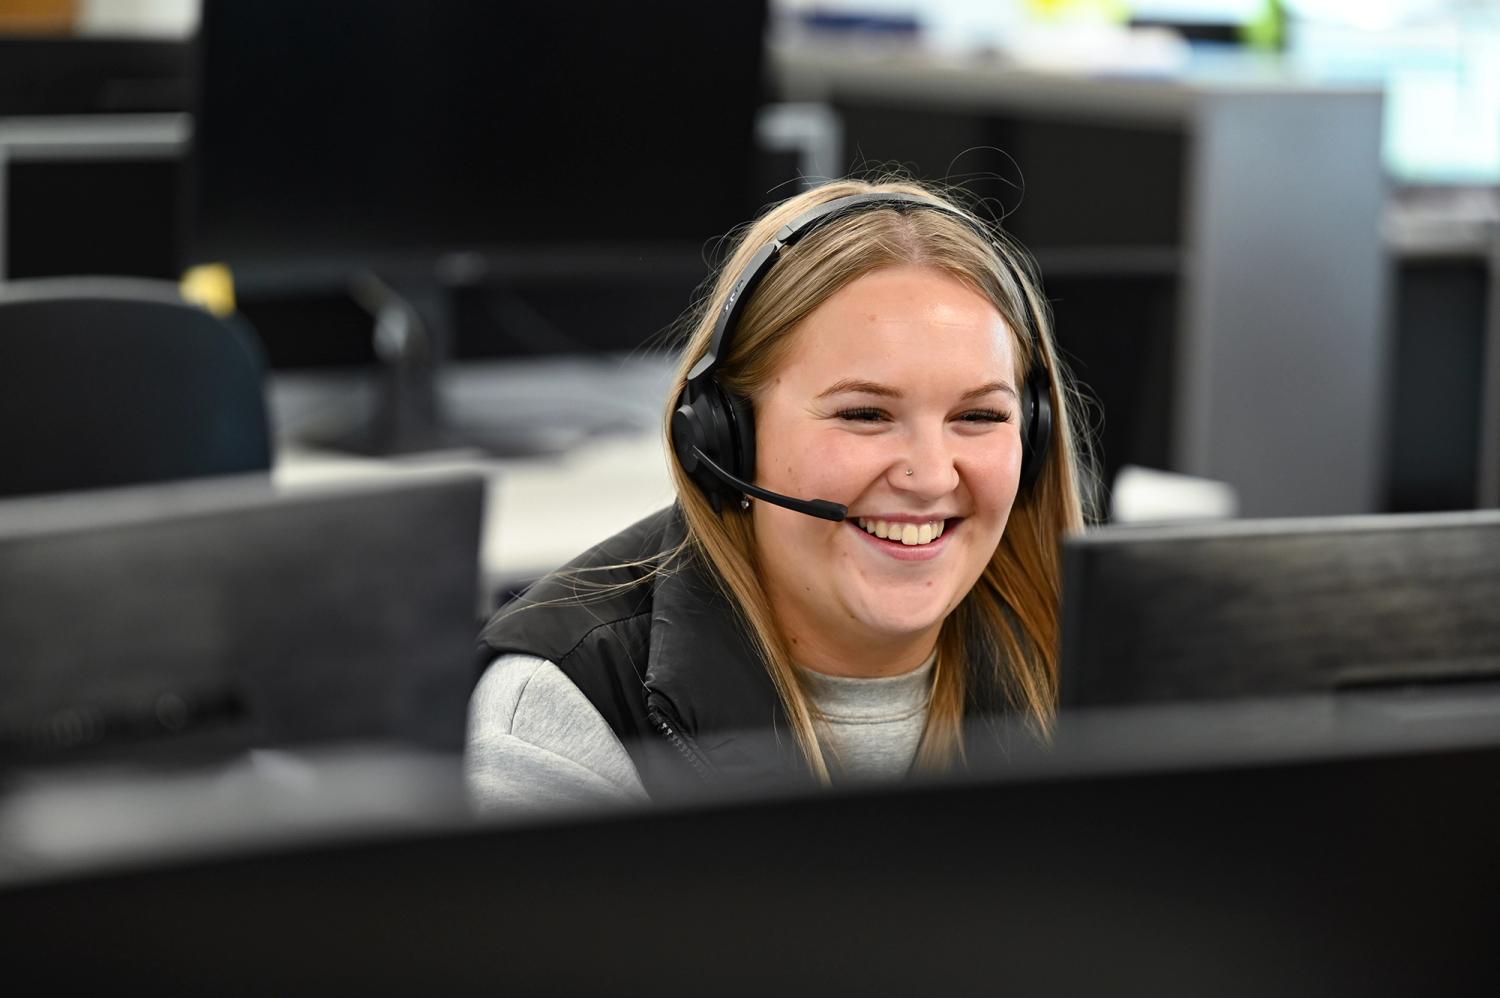 A customer service agent laughing on the phone with a customer